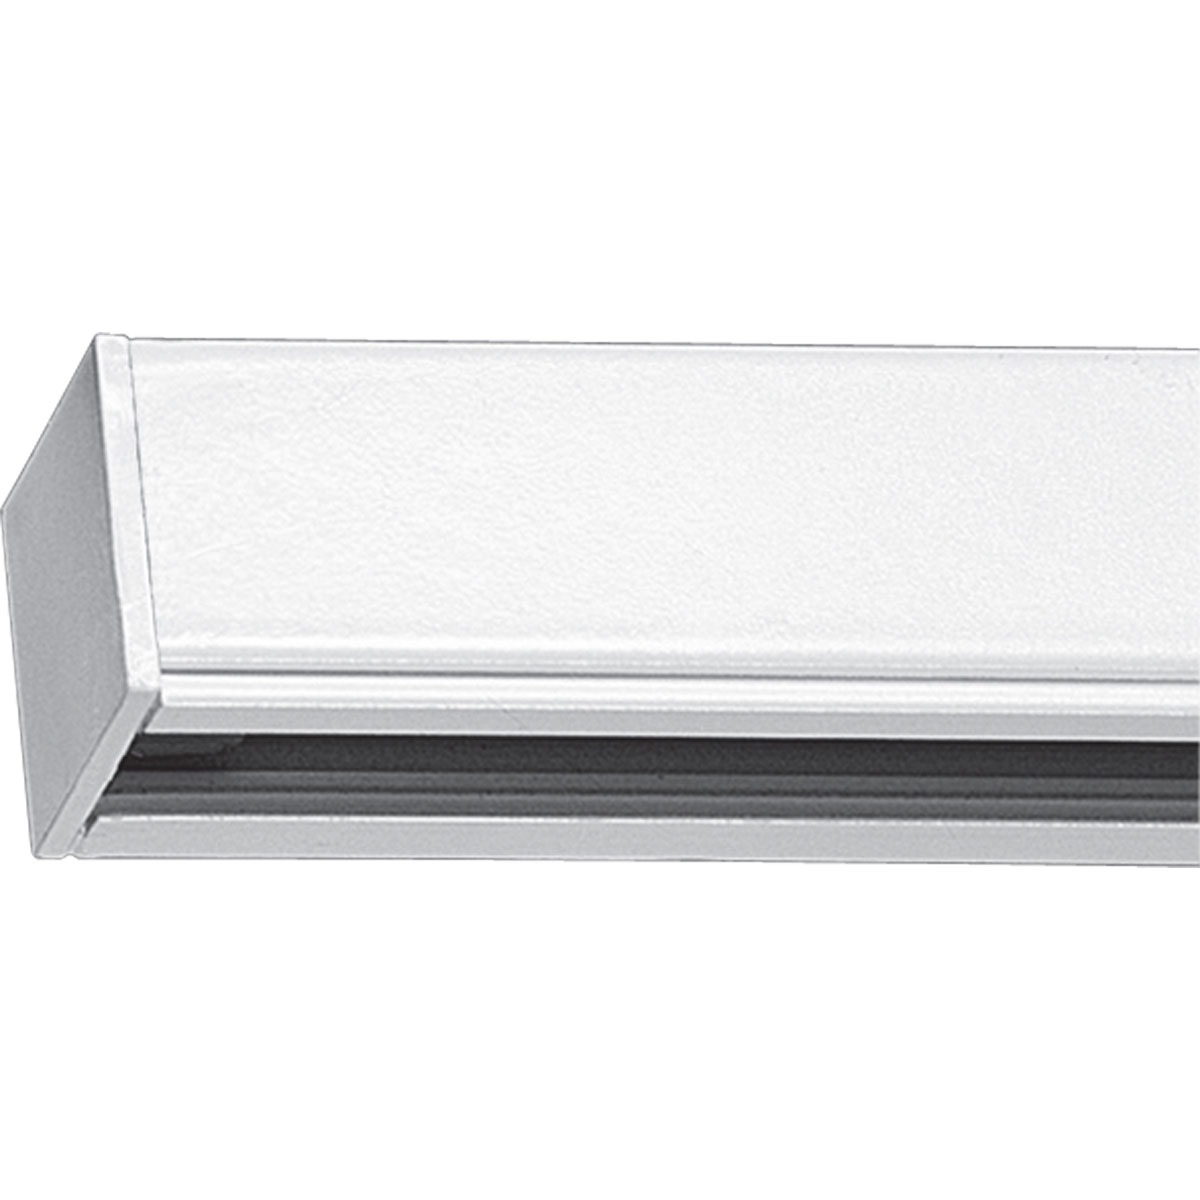 Alpha Trak sections are extruded aluminum with positive contact, can be cut. Designed for 120-volt supply with 20 amp capacity. All 8' track sections include one dead end and mounting hardware. White finish.